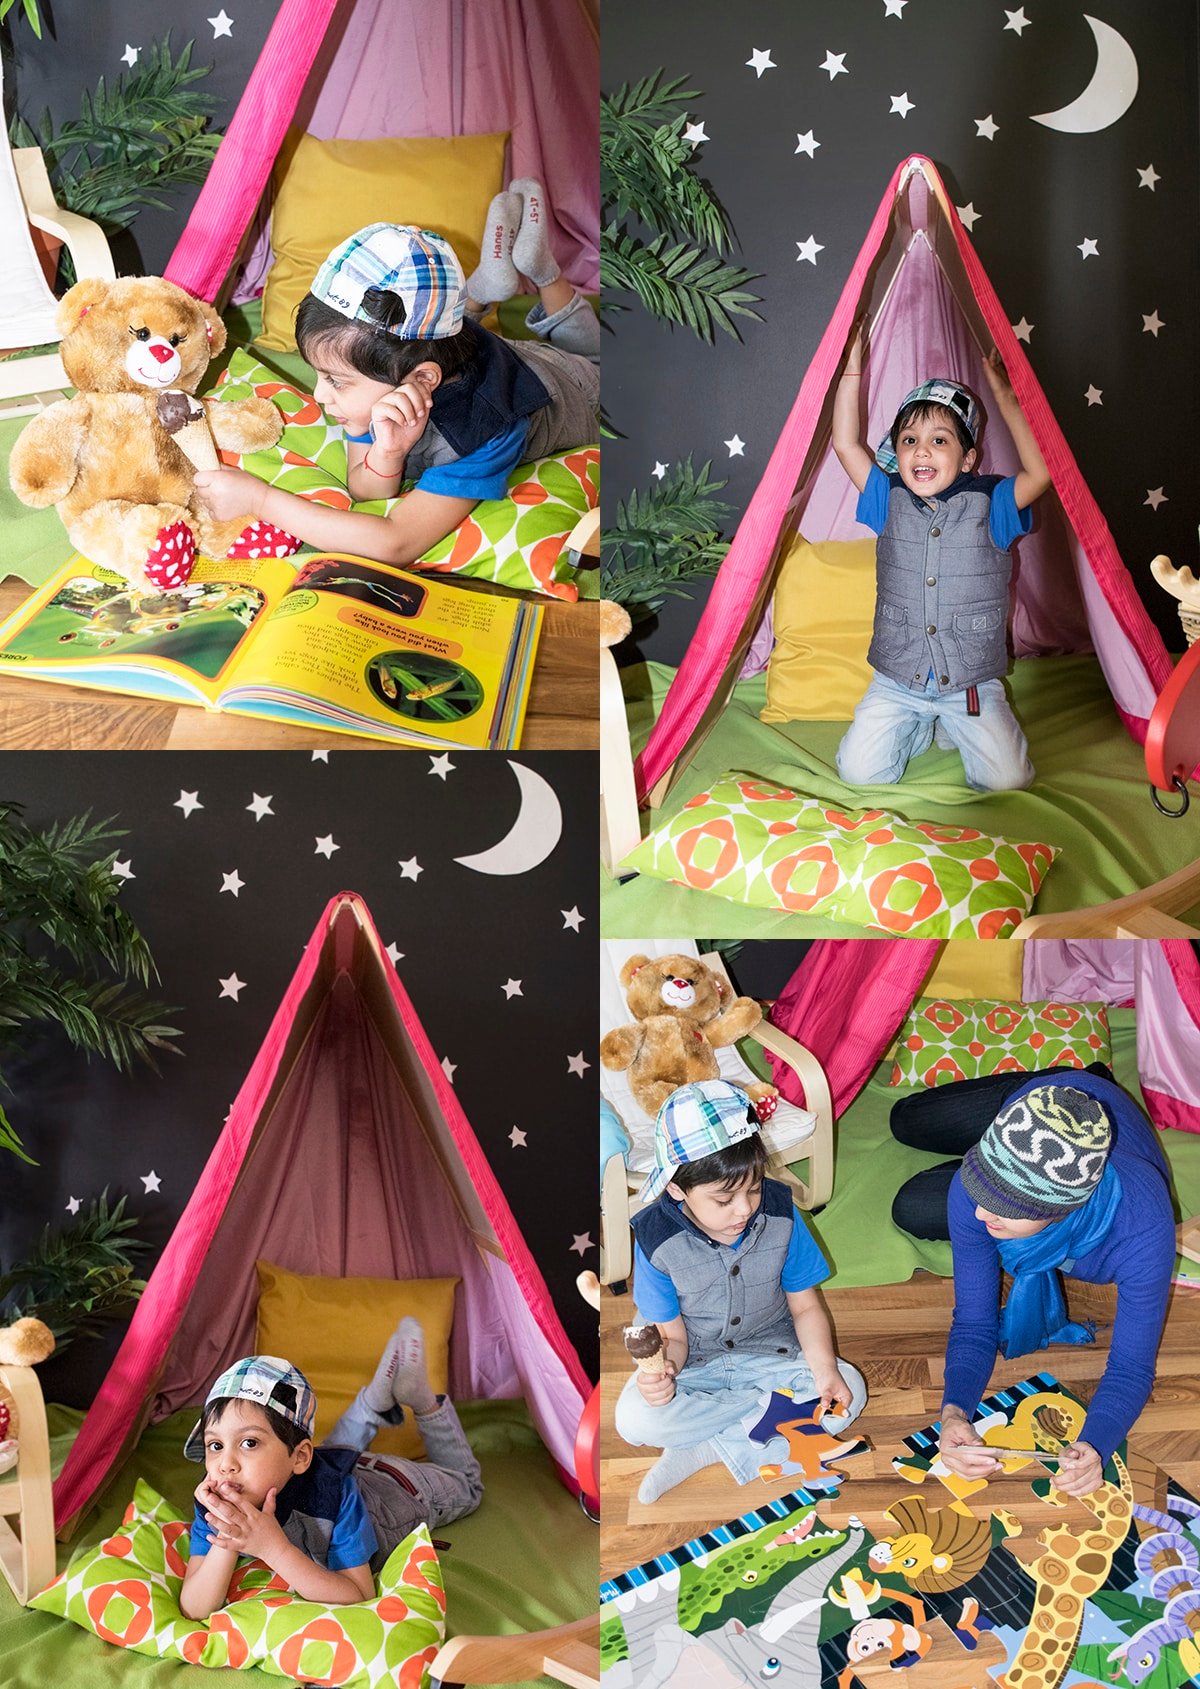 Collage Image With Indoor Camping Party Activities.